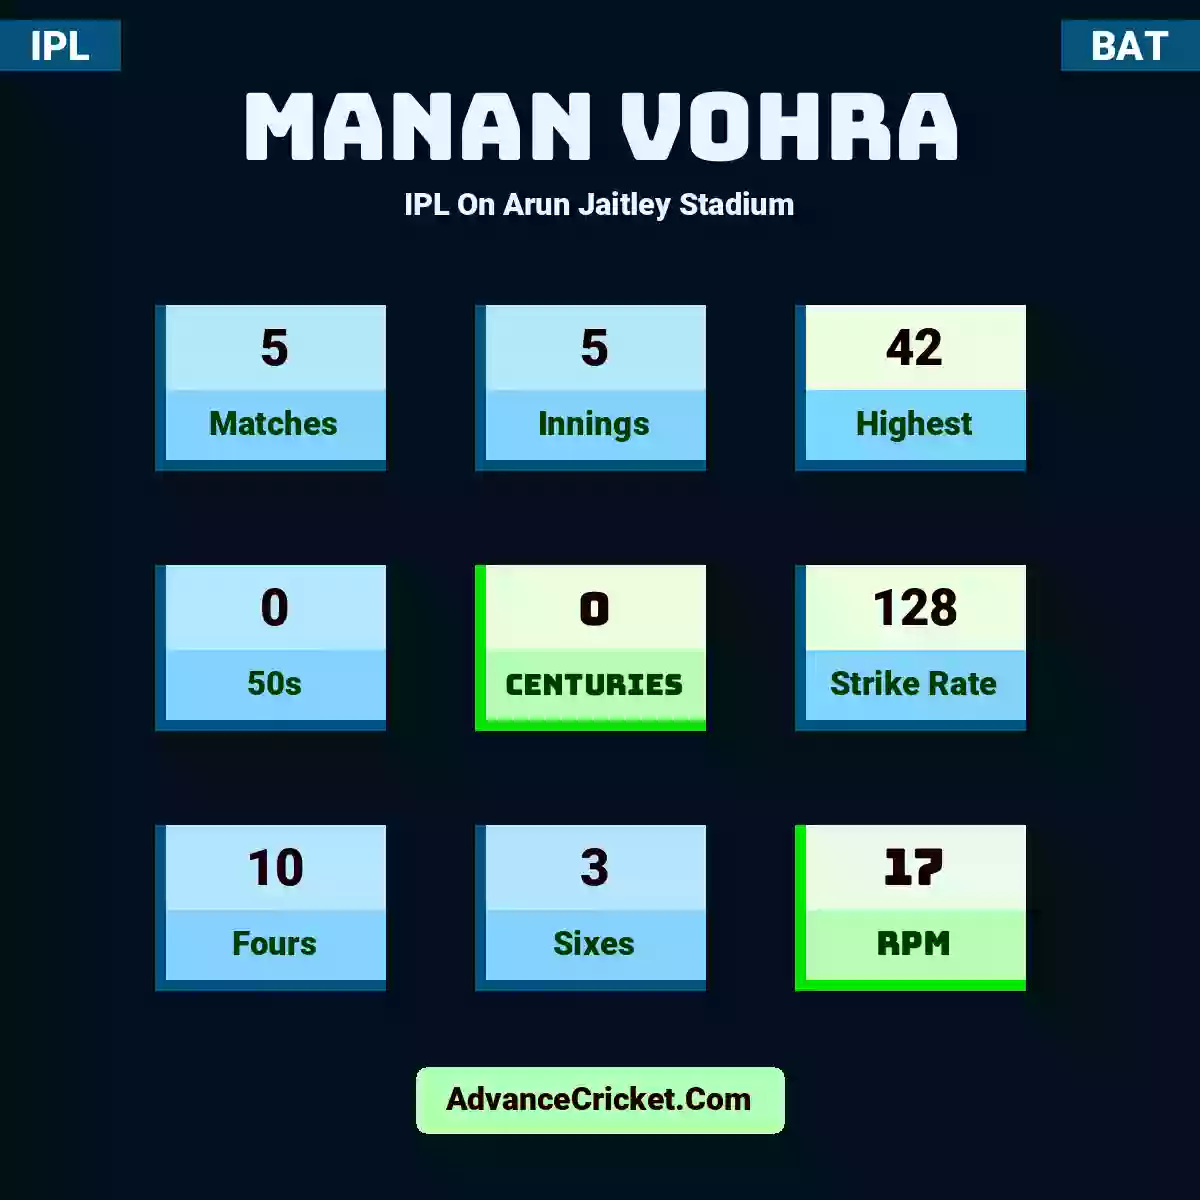 Manan Vohra IPL  On Arun Jaitley Stadium, Manan Vohra played 5 matches, scored 42 runs as highest, 0 half-centuries, and 0 centuries, with a strike rate of 128. M.Vohra hit 10 fours and 3 sixes, with an RPM of 17.